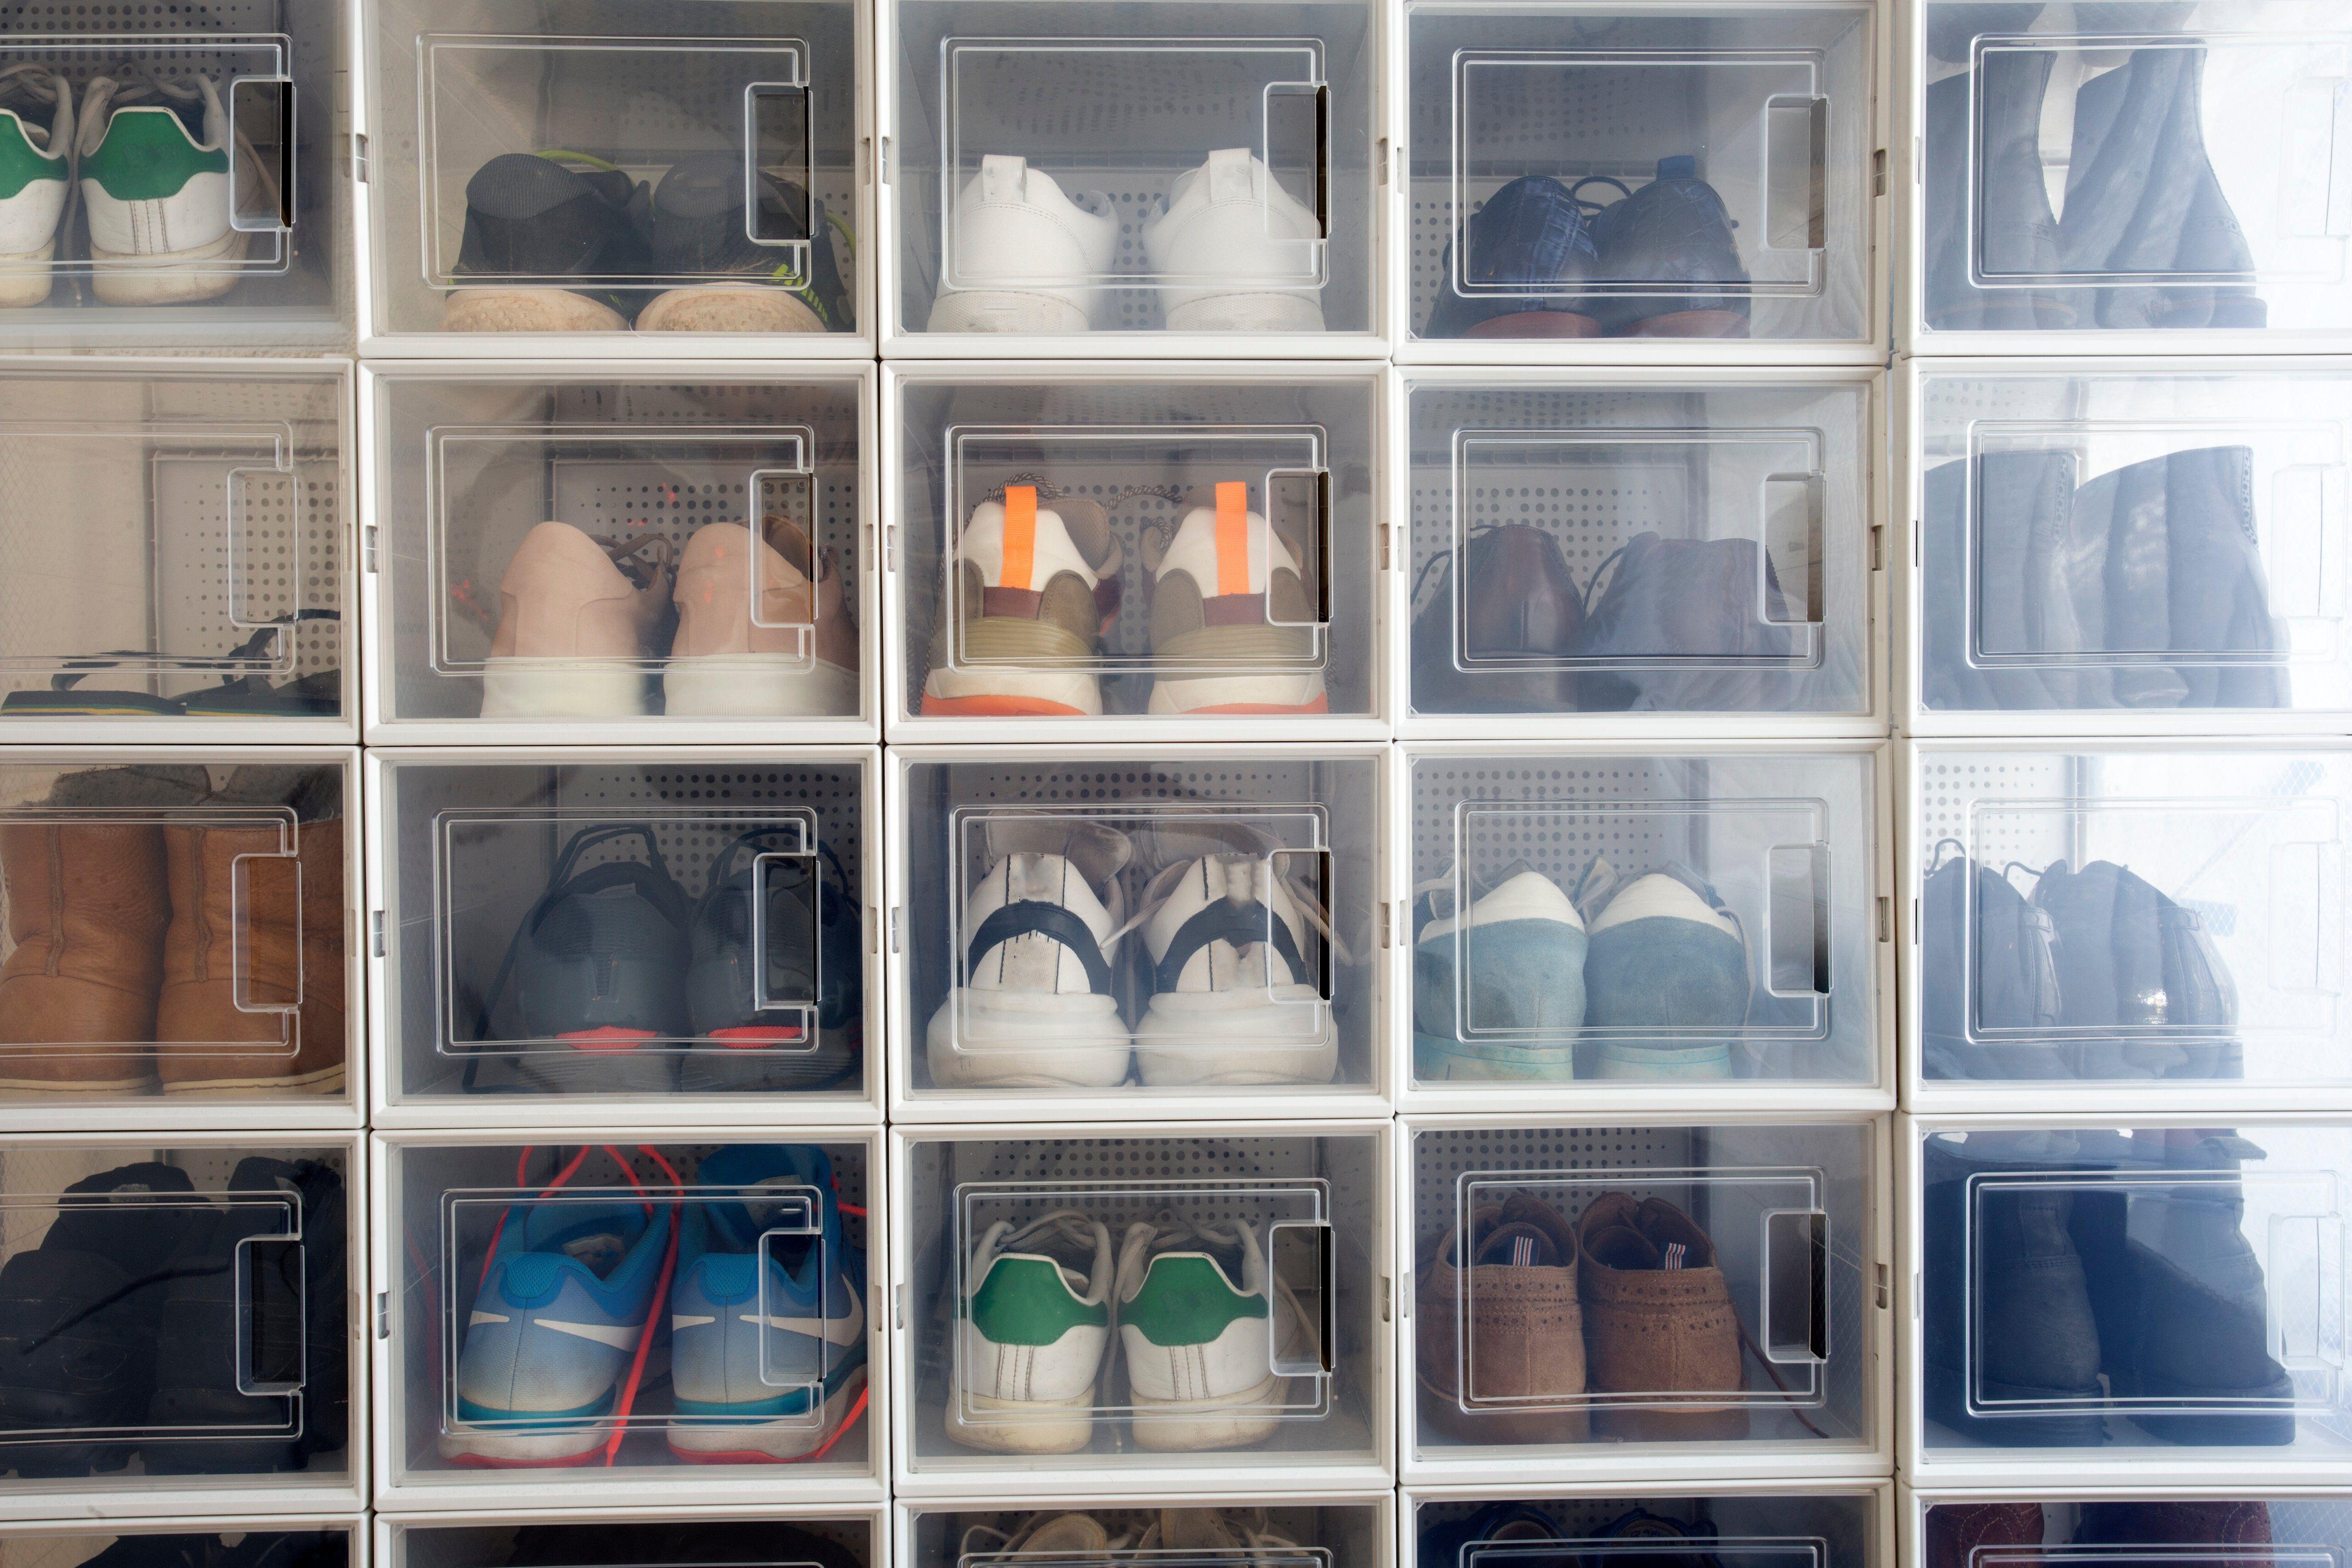 Organize shoes: 10 top tactics to keep footwear neat